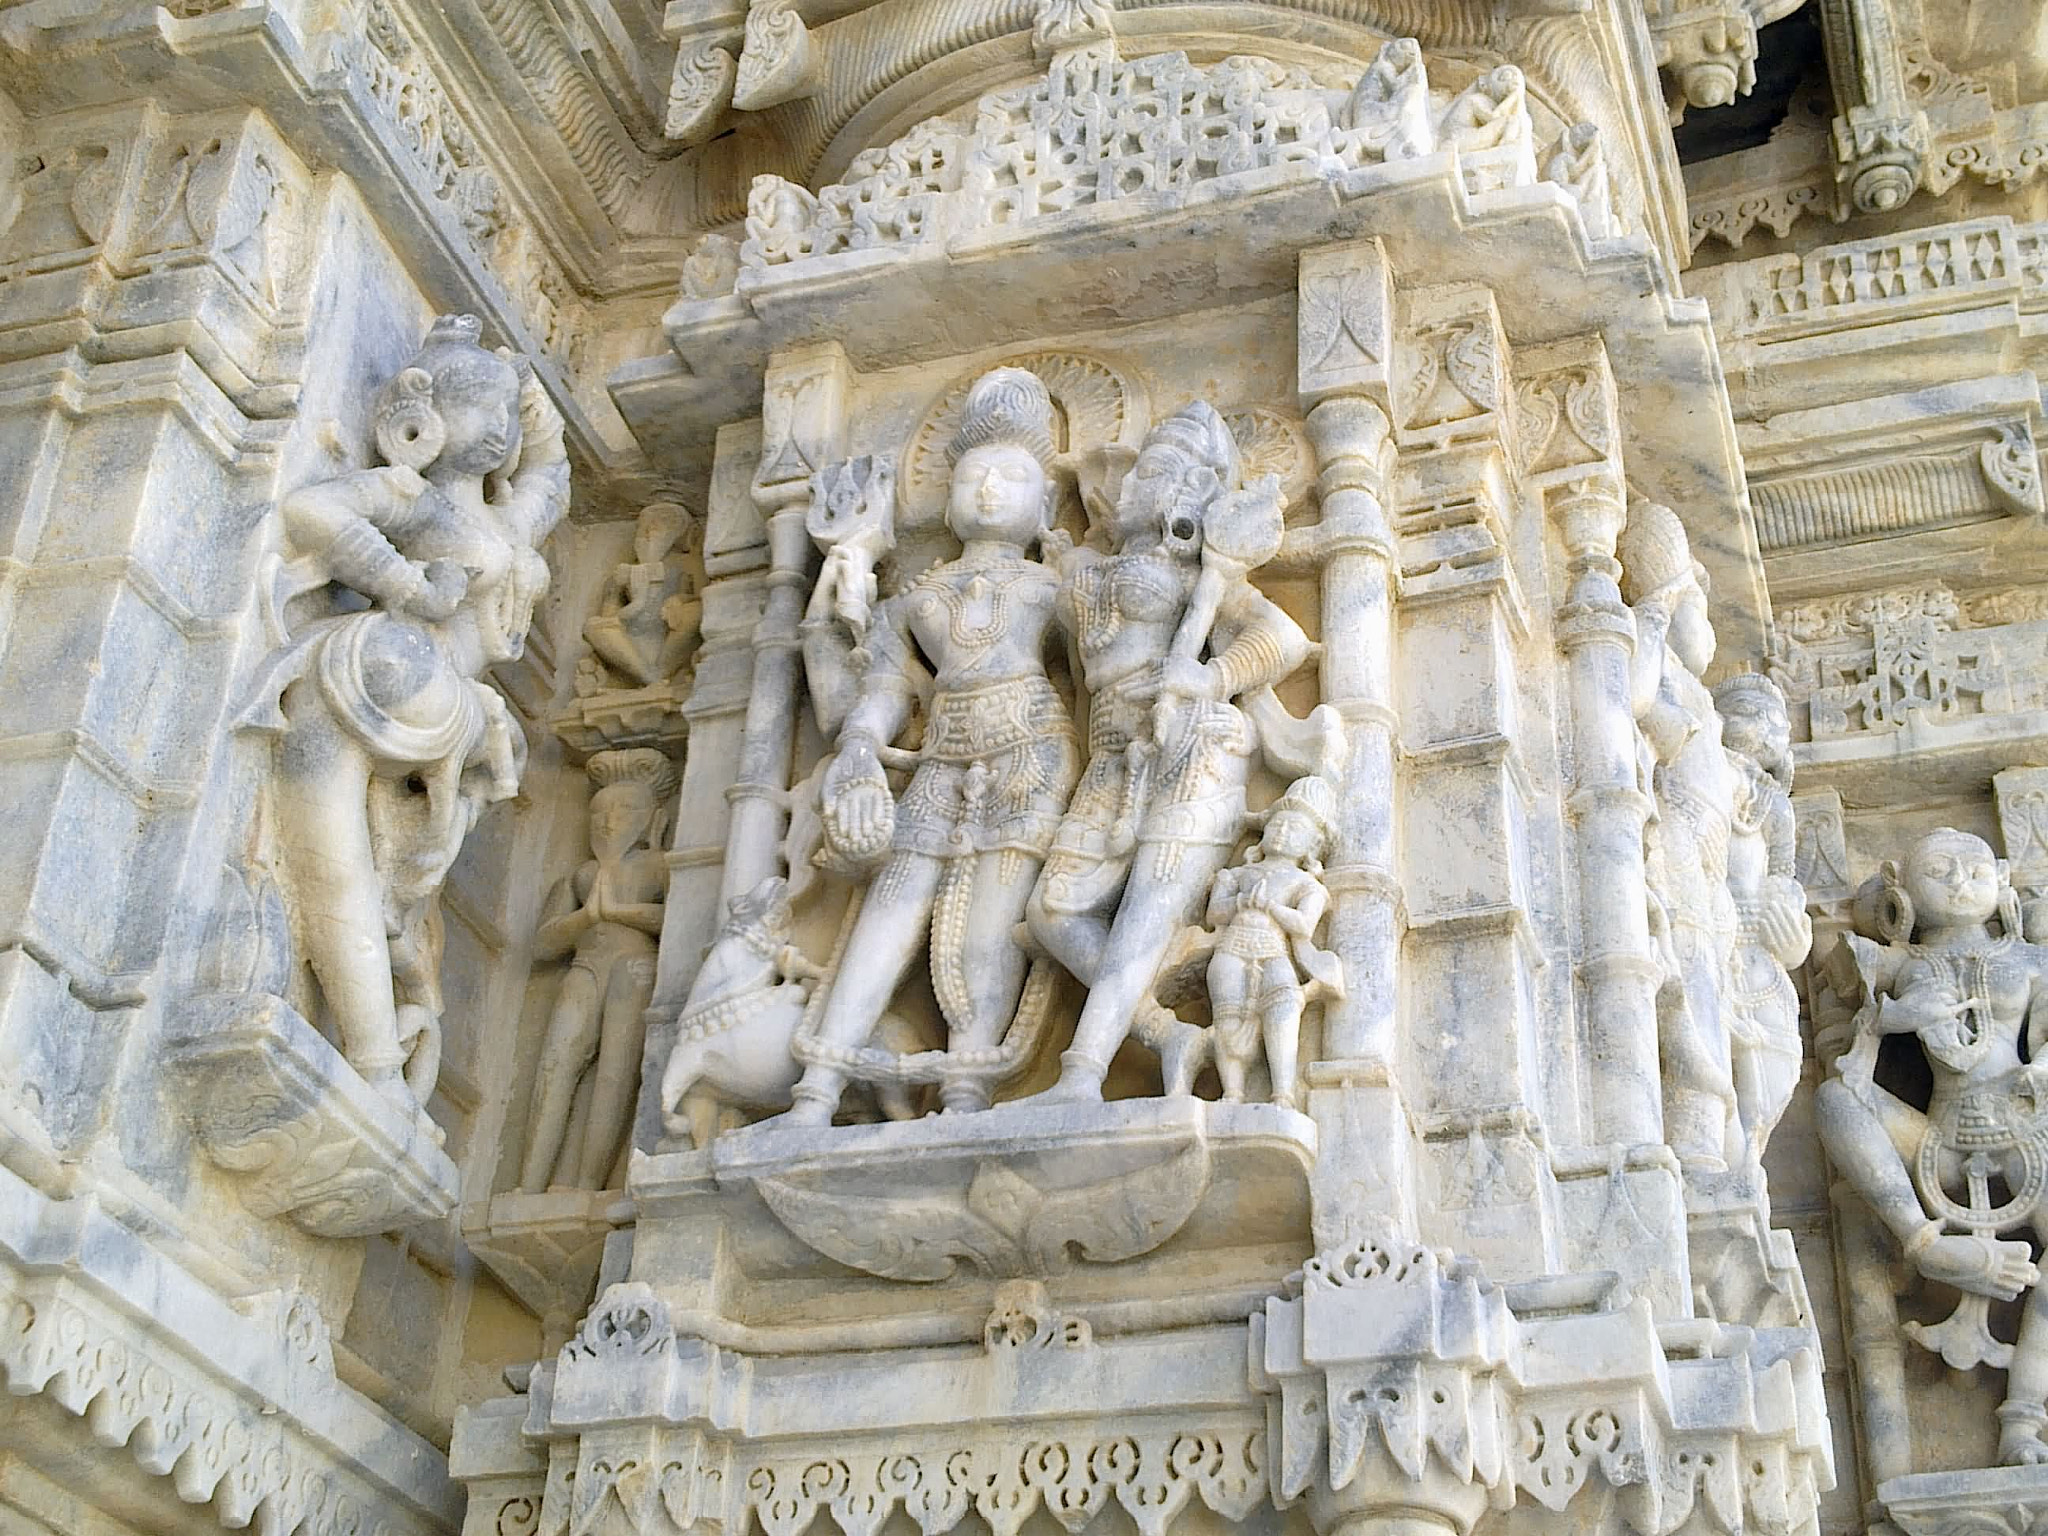 Nokia E72-1 sample photo. Statue of lord shankar on the walls of mirpur jain temple photography